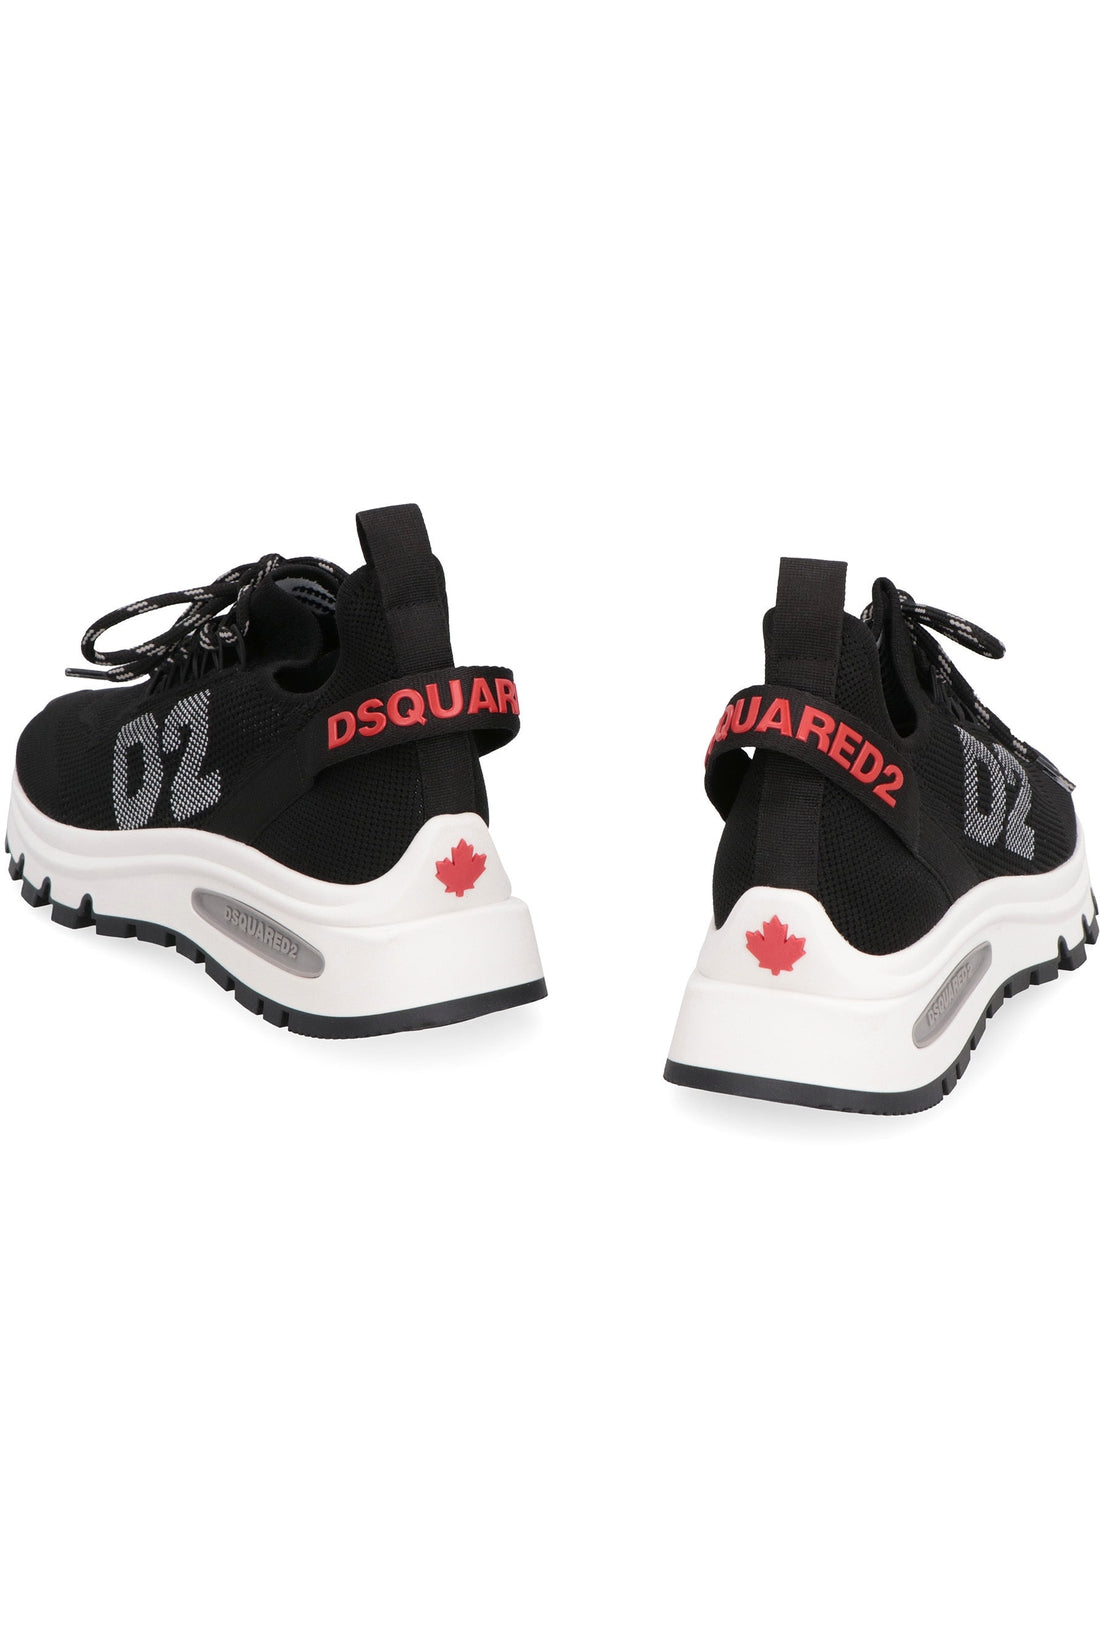 Dsquared2-OUTLET-SALE-Fabric low-top sneakers-ARCHIVIST